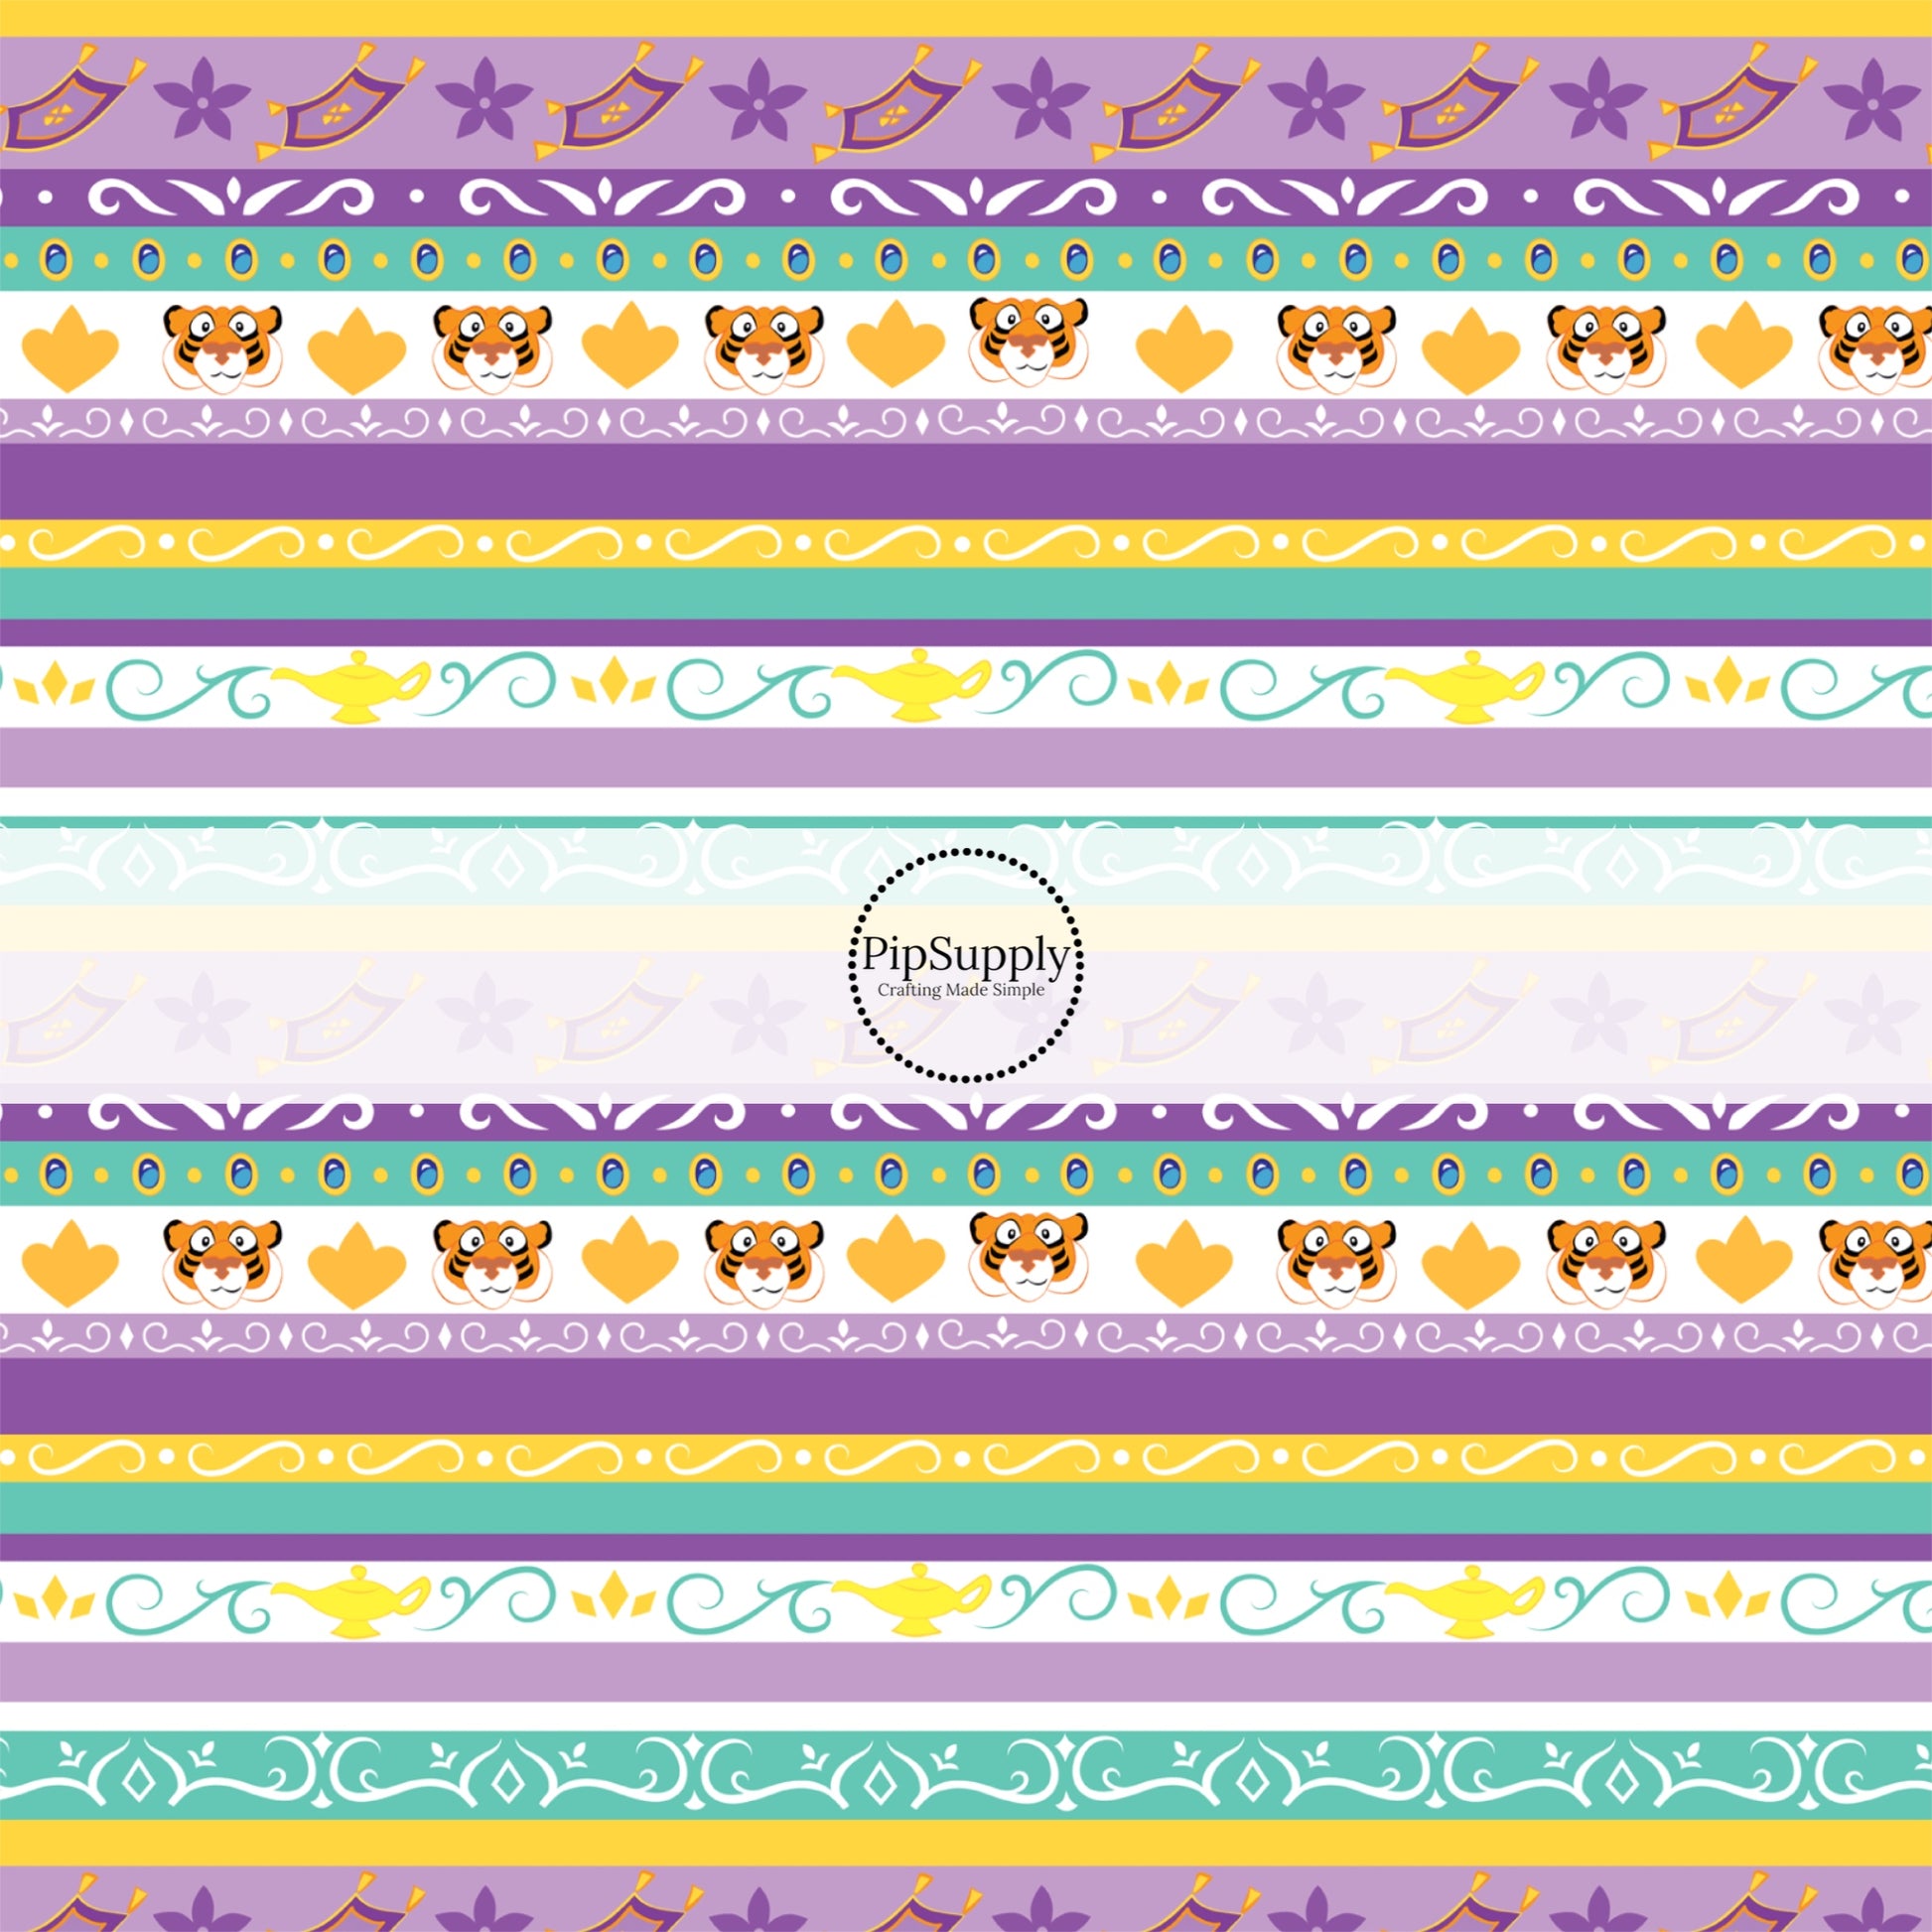 Purple and teal princess stripes fabric by the yard with tigers and flying carpets.